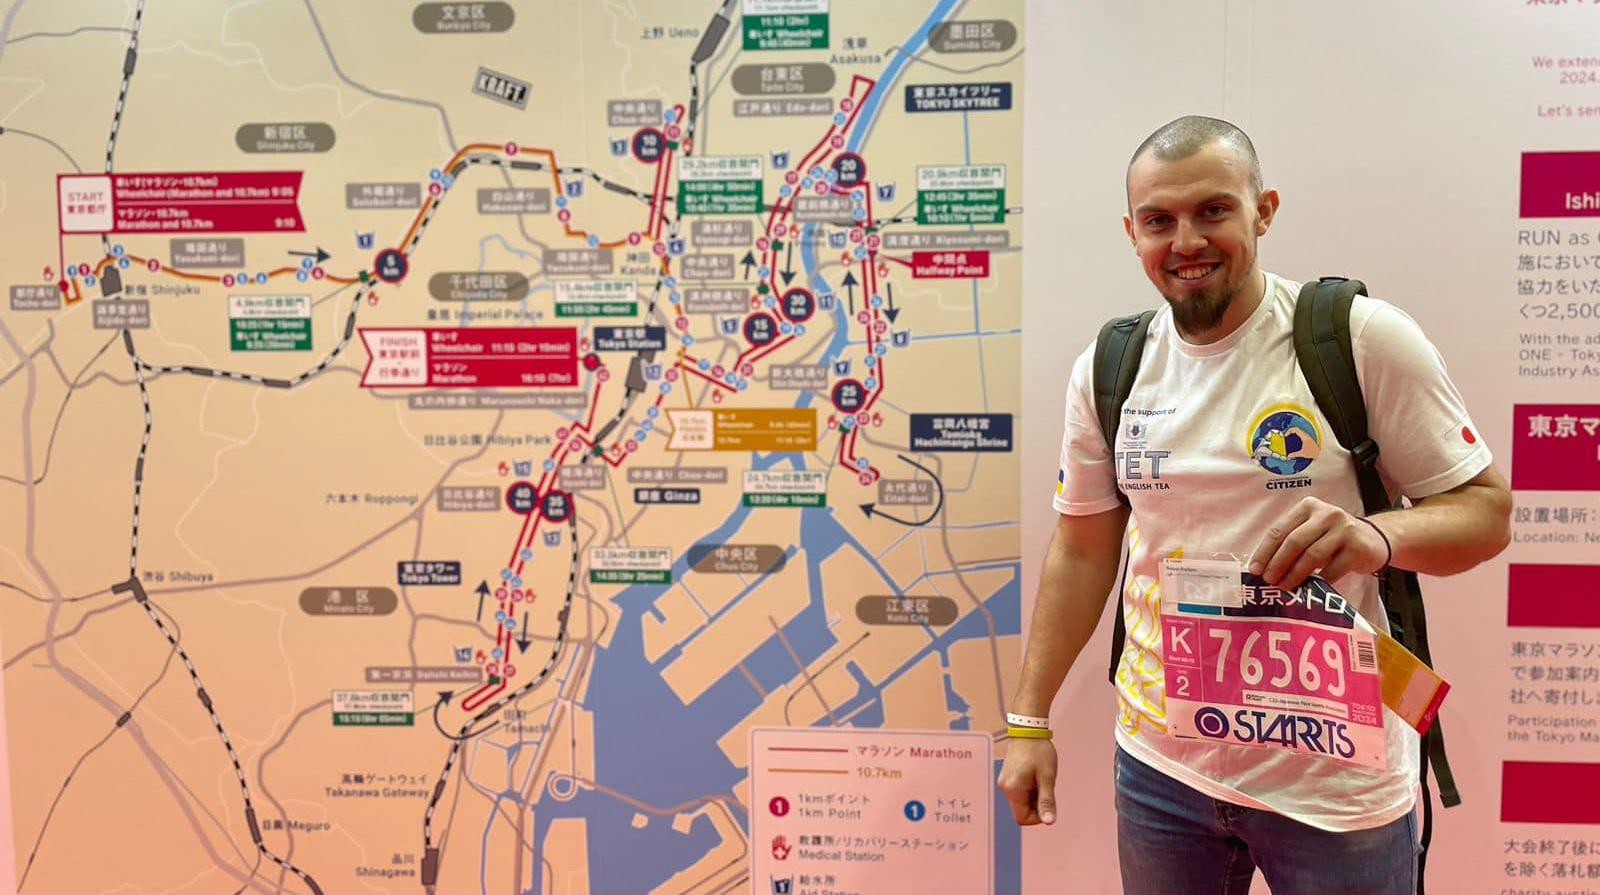 A veteran from Vinnytsia spoke about the marathon in Tokyo and preparation for the race